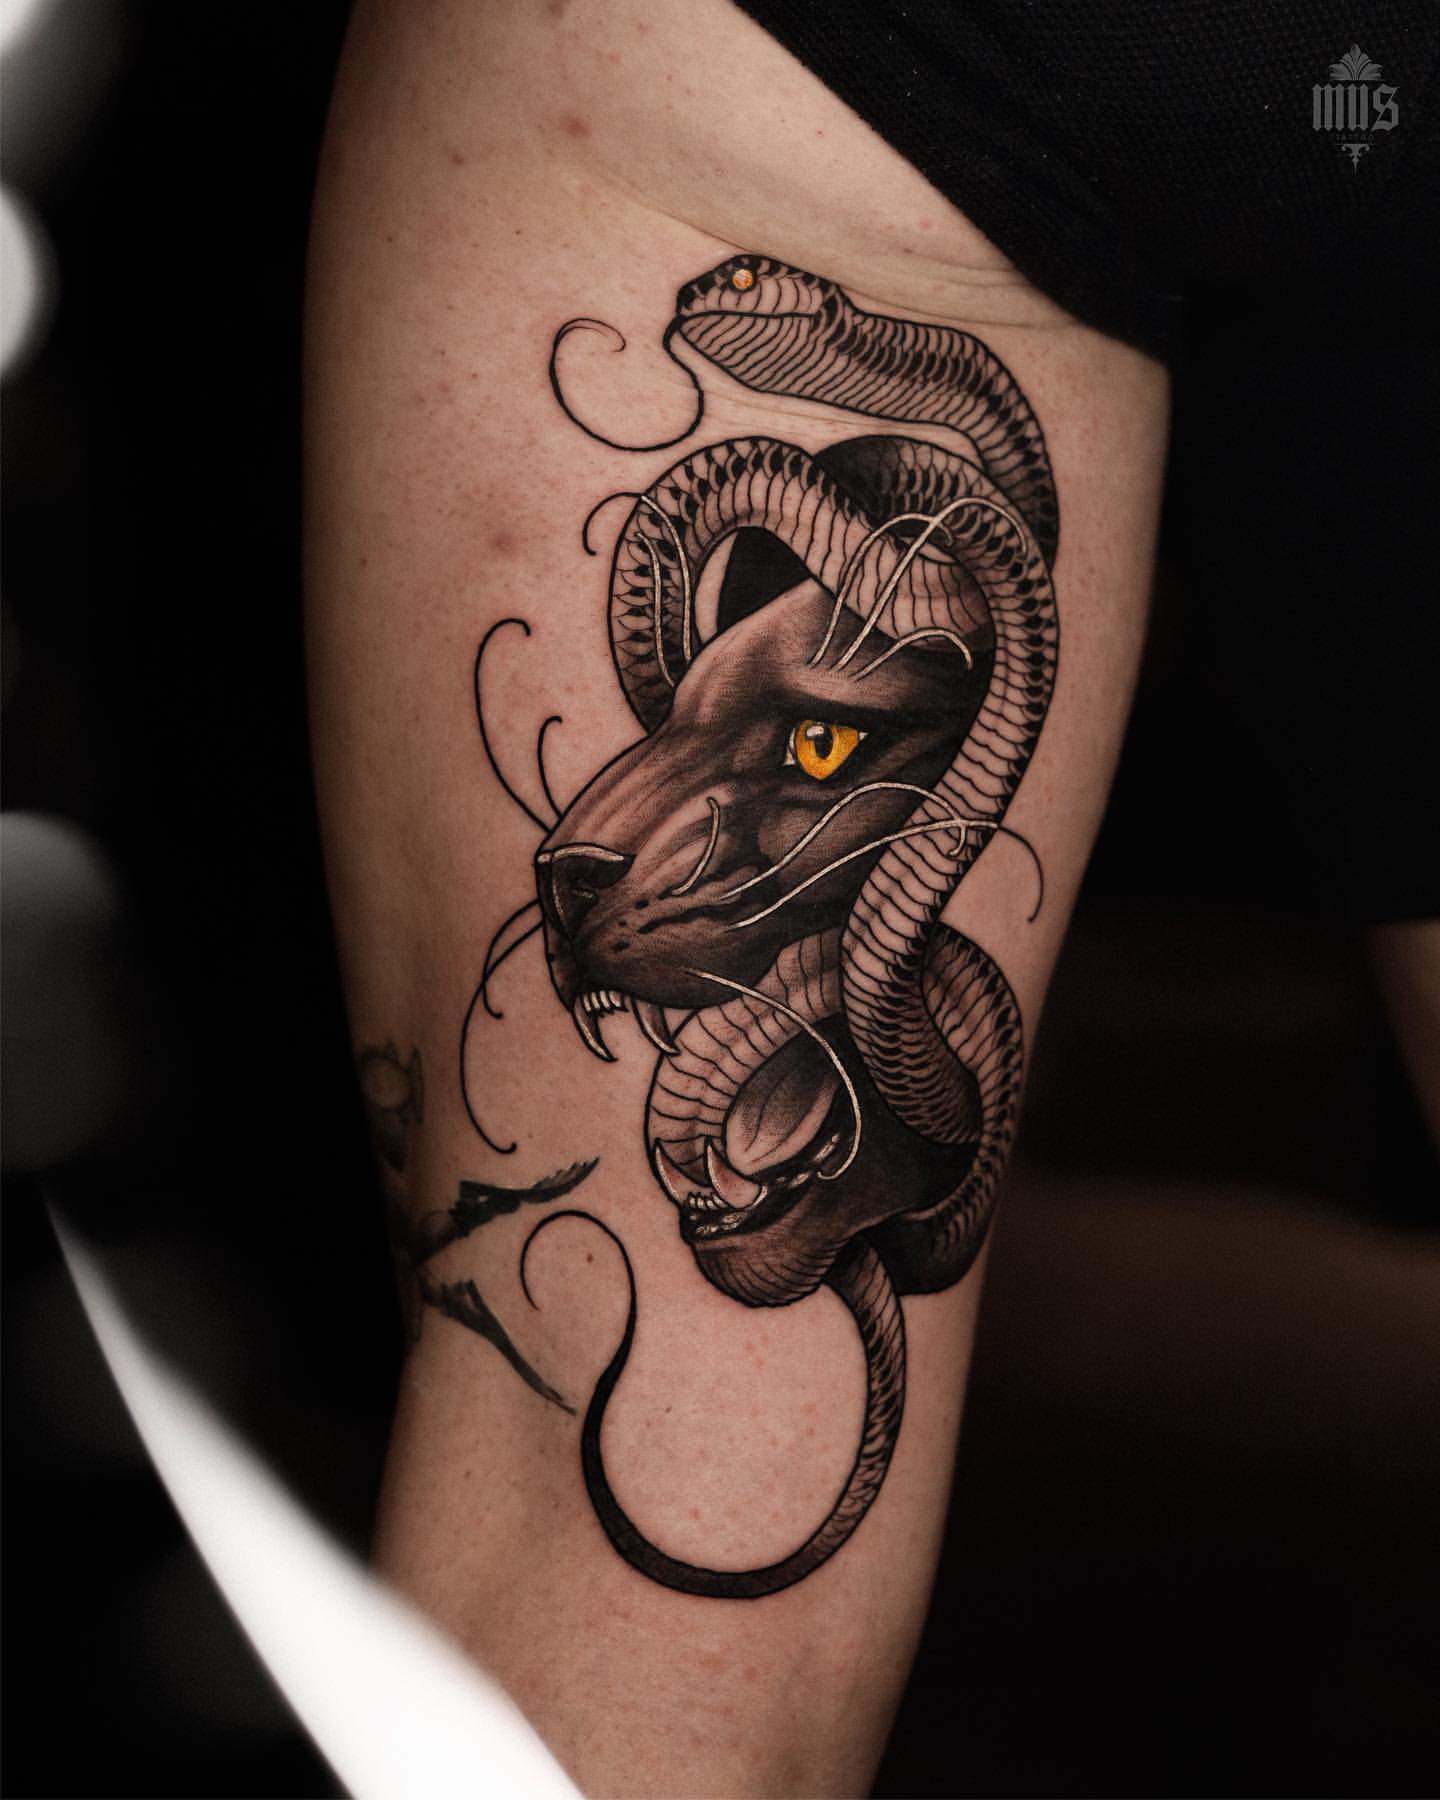 Panther Tattoo Ideas 27